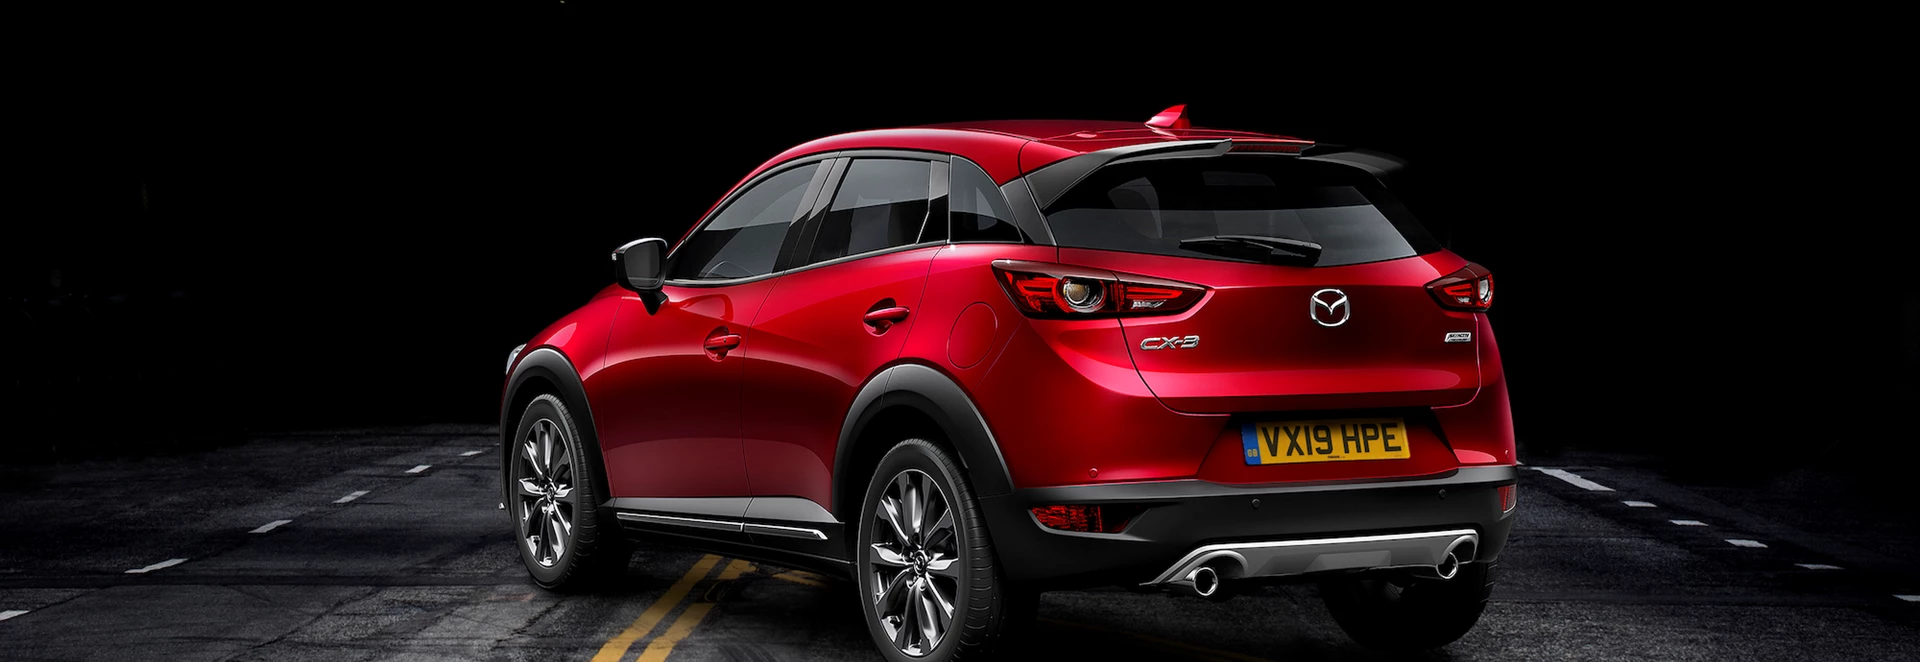 Mazda CX-3 range updated with new limited edition trim